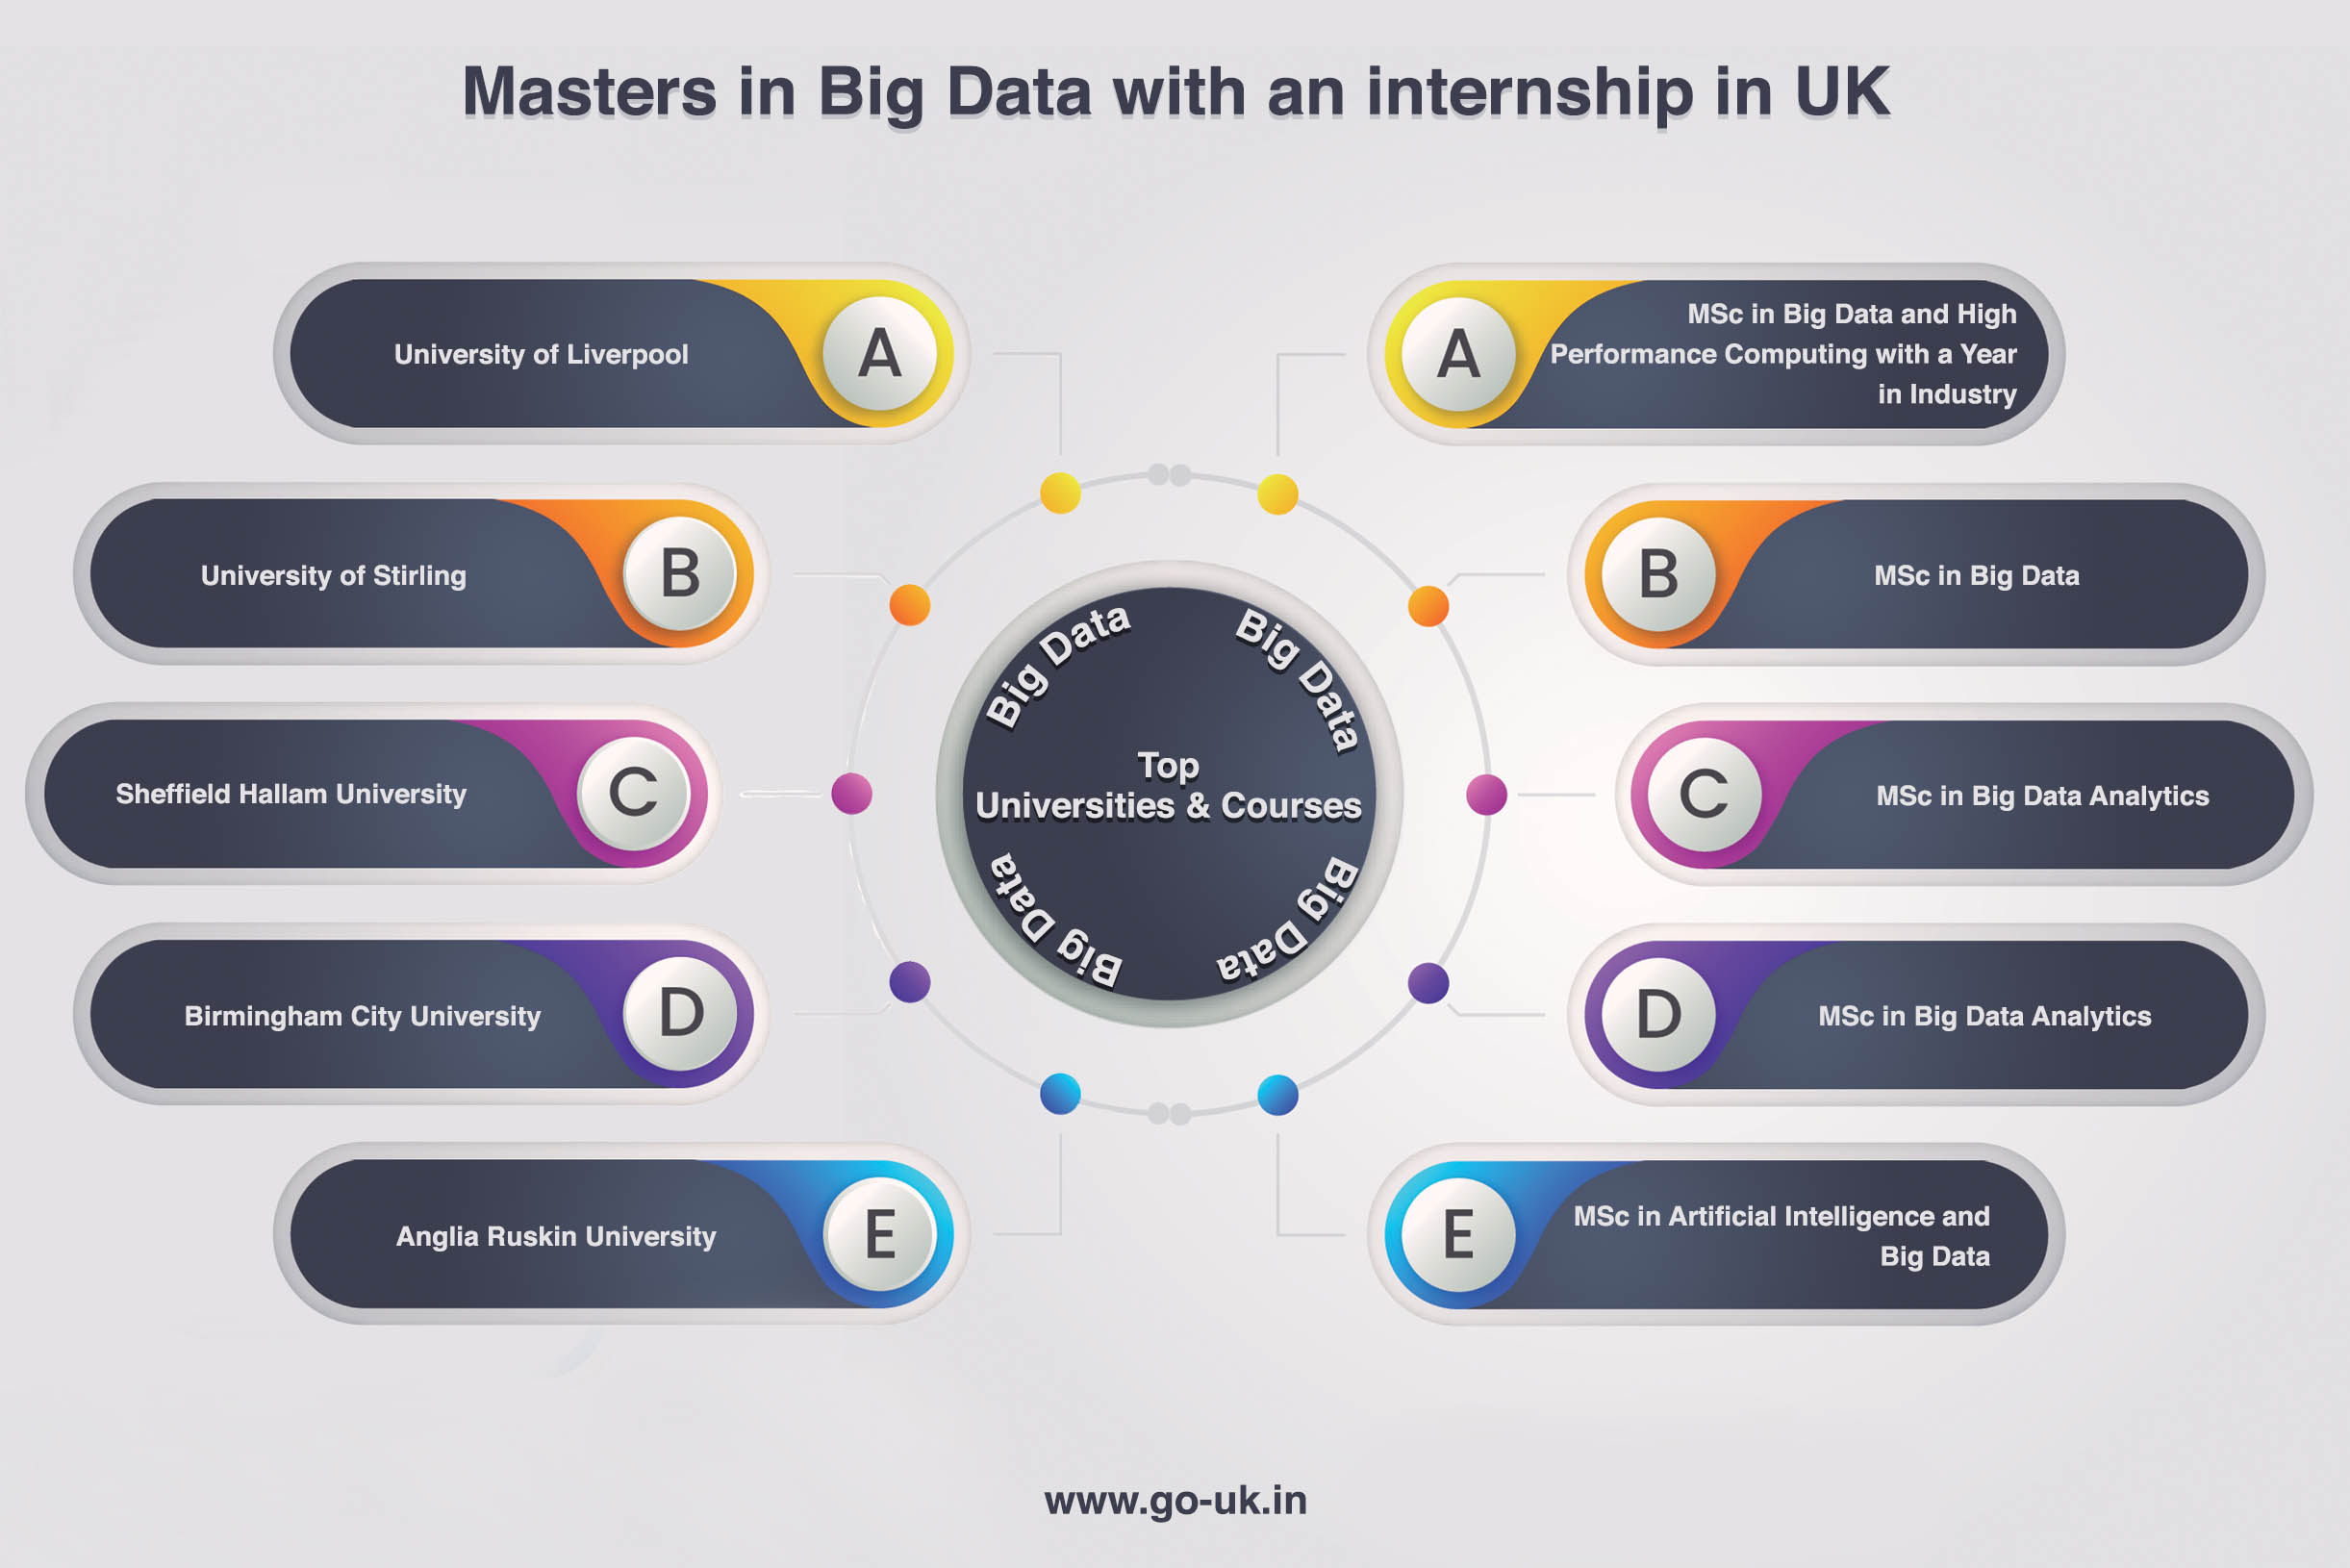 Masters in Big Data with an Internship in UK